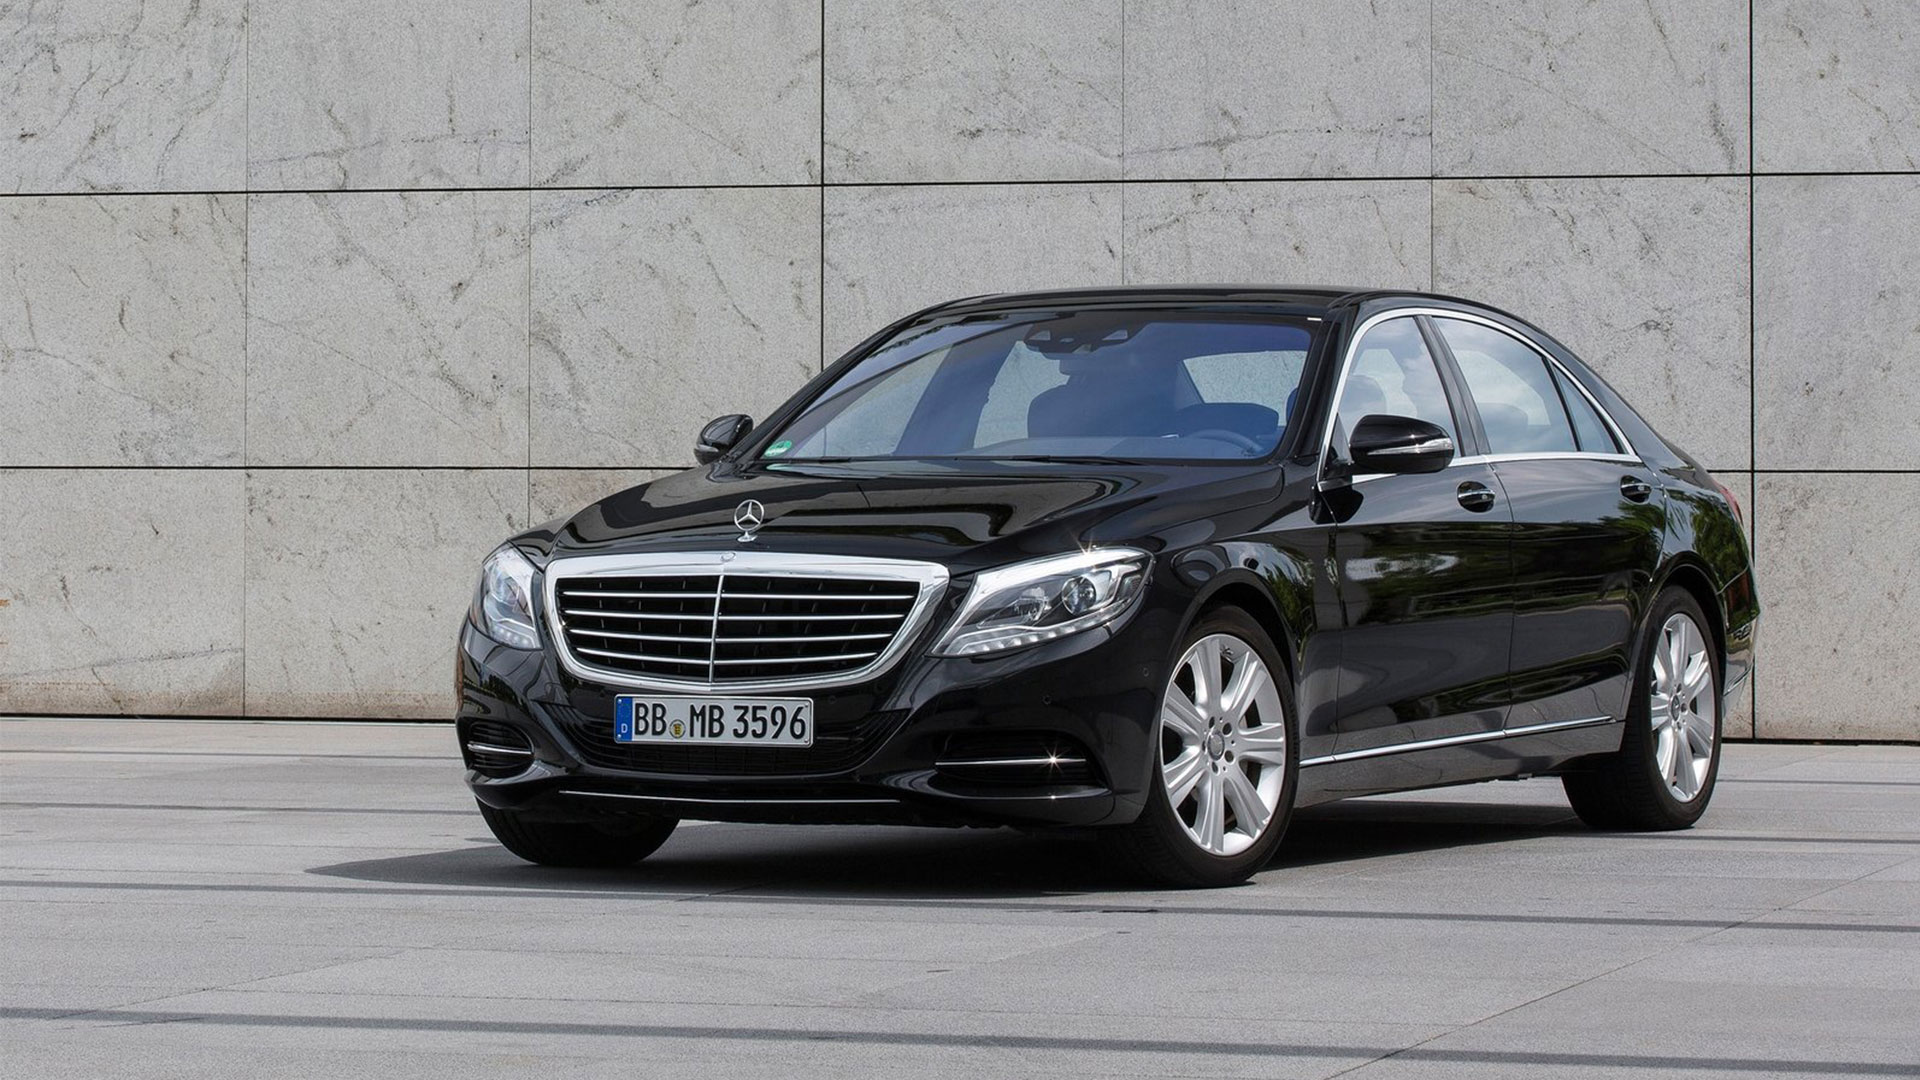 Mercedes-benz S500 2015: Review, Amazing Pictures and Images - Look at ...